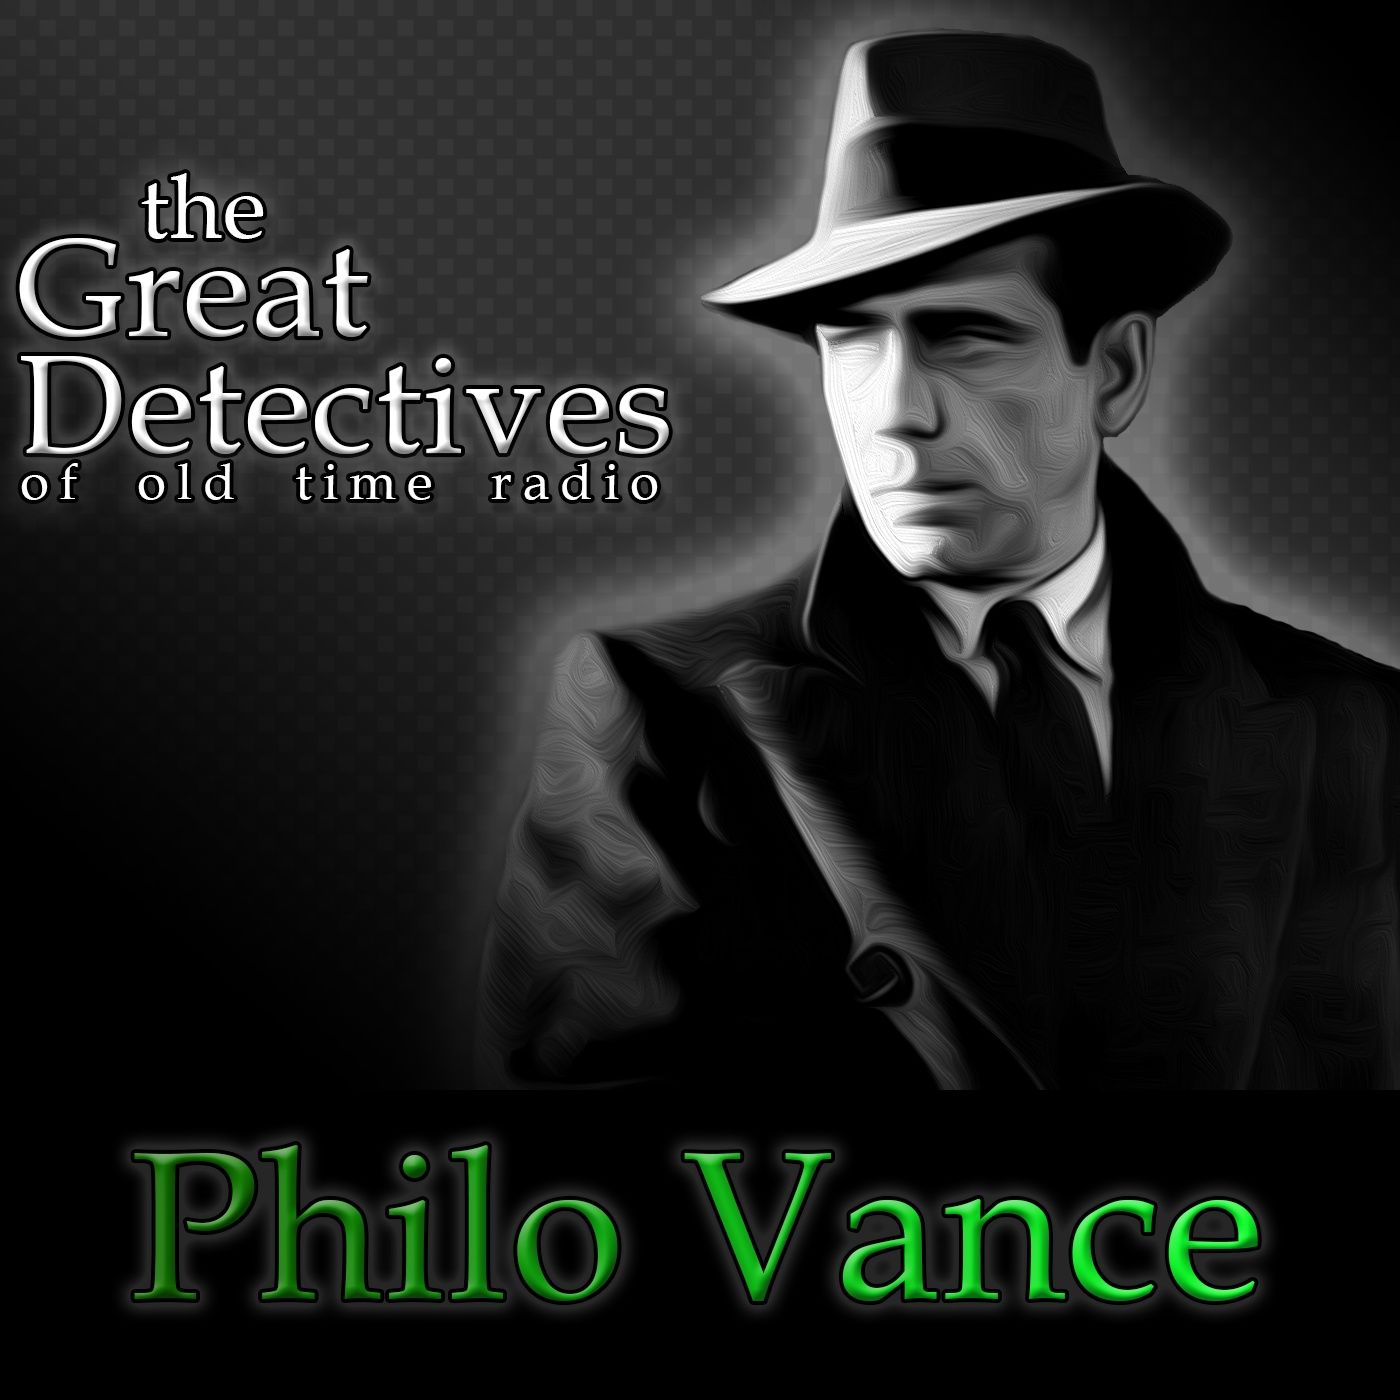 Philo Vance: The Case of the Cellini Cup (EP3564)